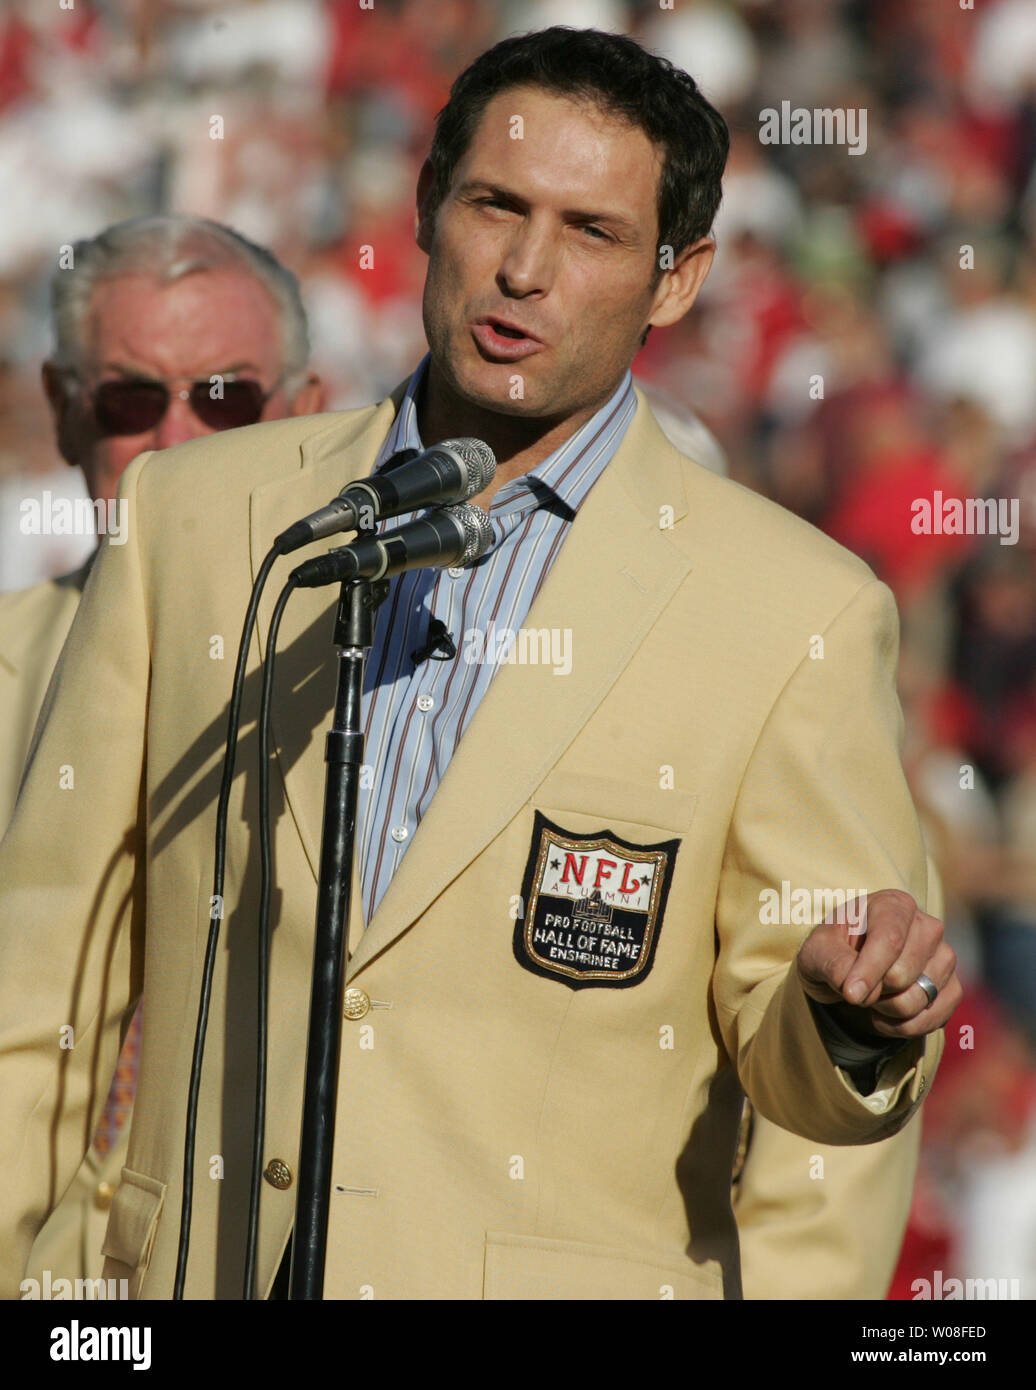 Hall of Fame QB Steve Young speaks at Monster Park in San Francisco on November 20, 2005. Young was honored as a new enshrinee to the Hall.  (UPI Photo/Terry Schmitt) Stock Photo